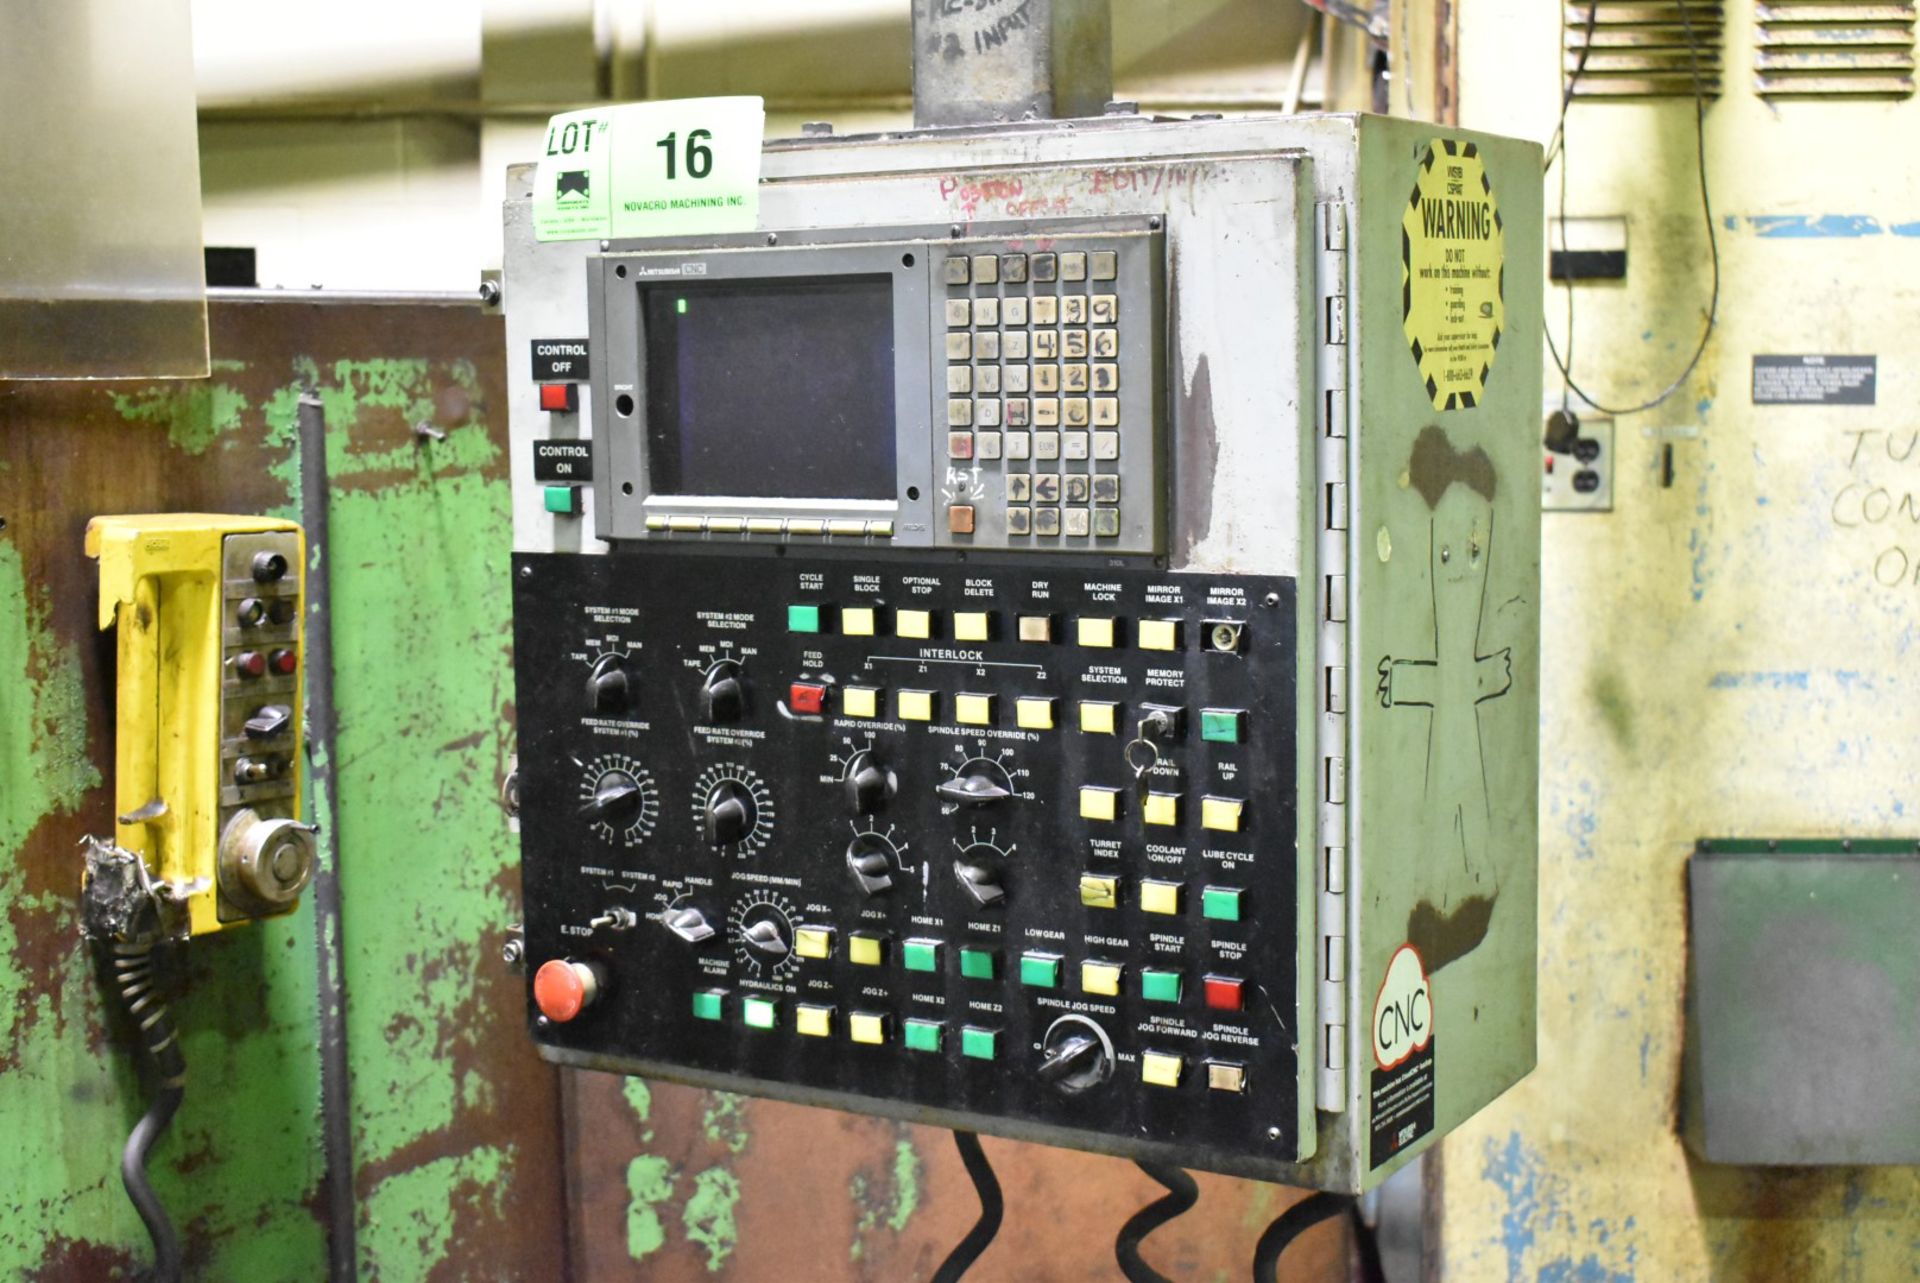 GIDDINGS & LEWIS 52" CNC VERTICAL TURRET LATHE WITH MITSUBISHI CNC CONTROL, 64" SWING, 42" MAX. - Image 2 of 7